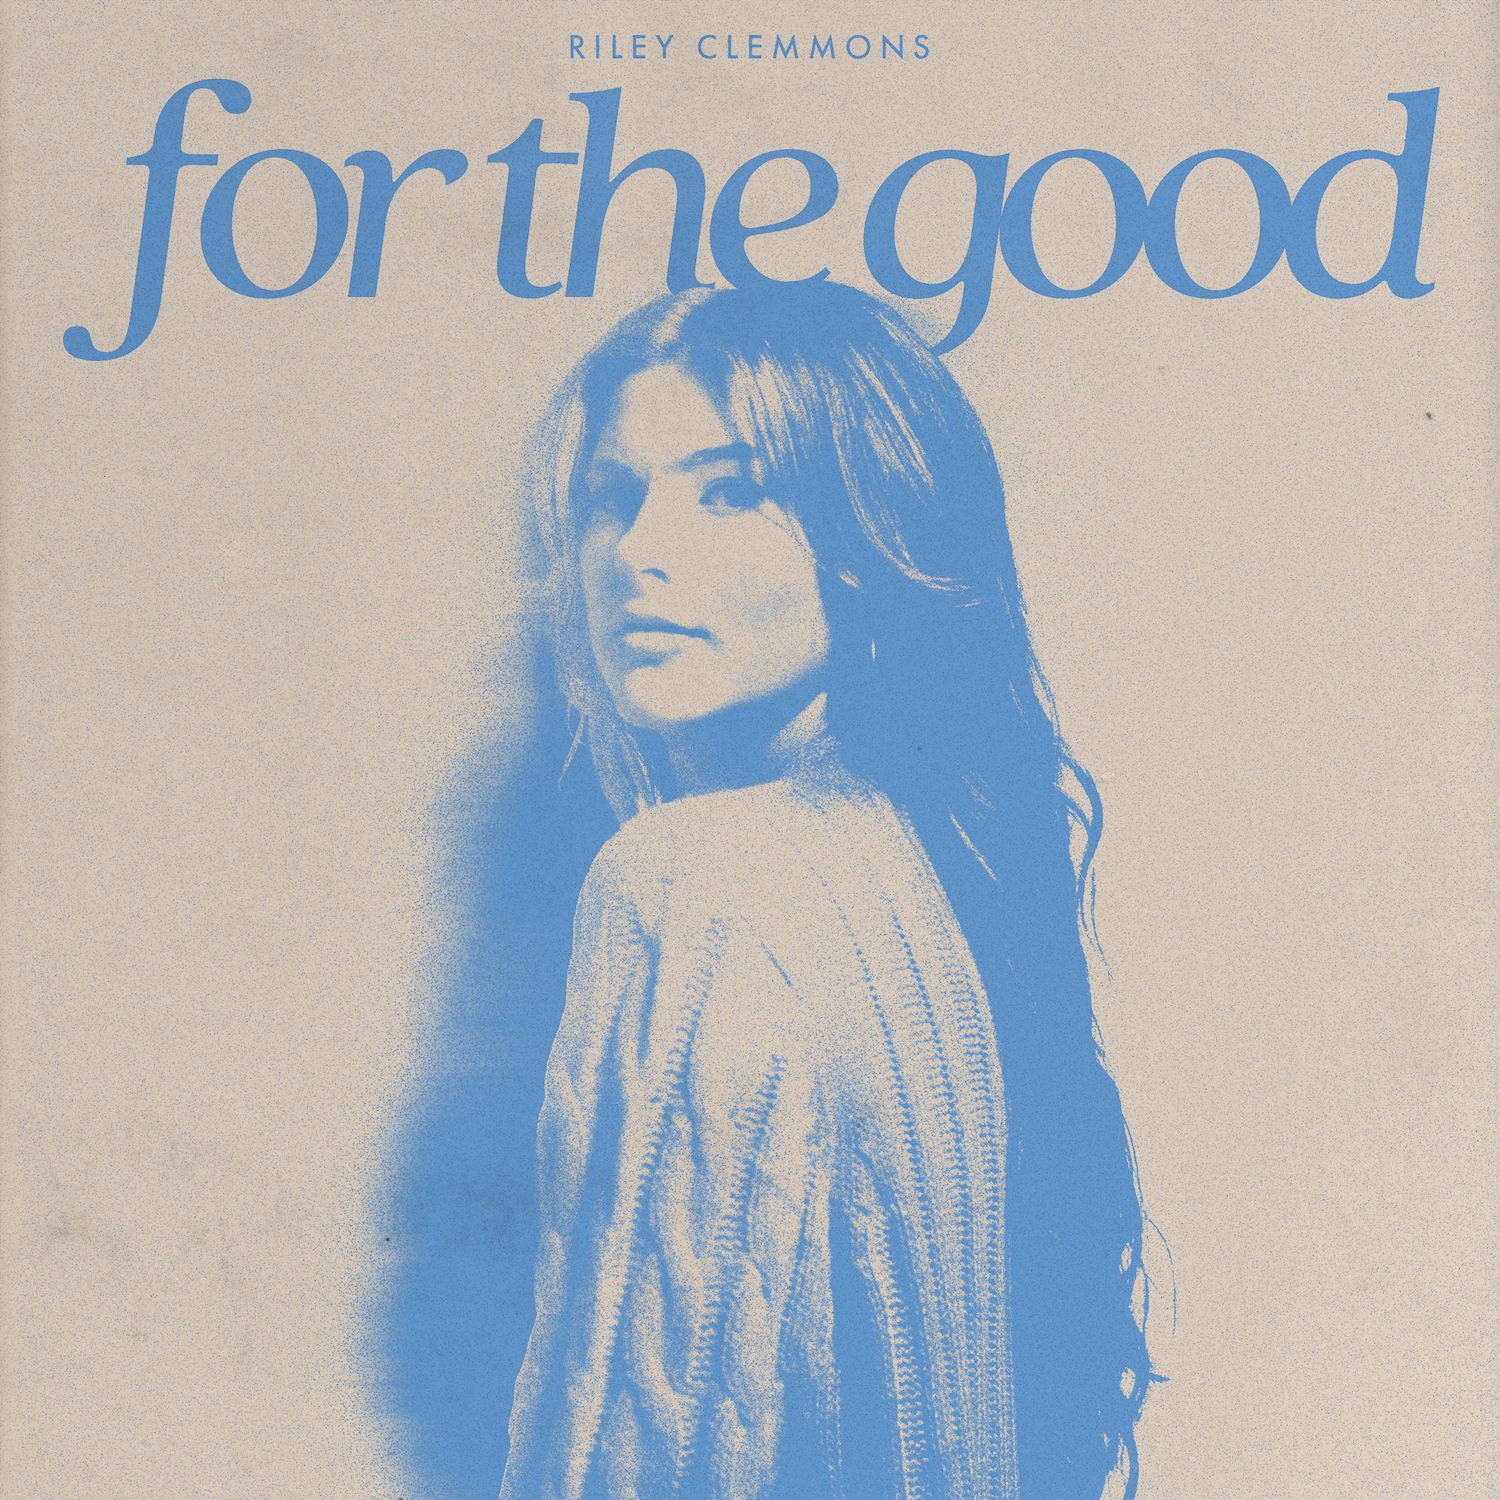 Riley Clemmons Reimagines Radio Hit, “For The Good” With New